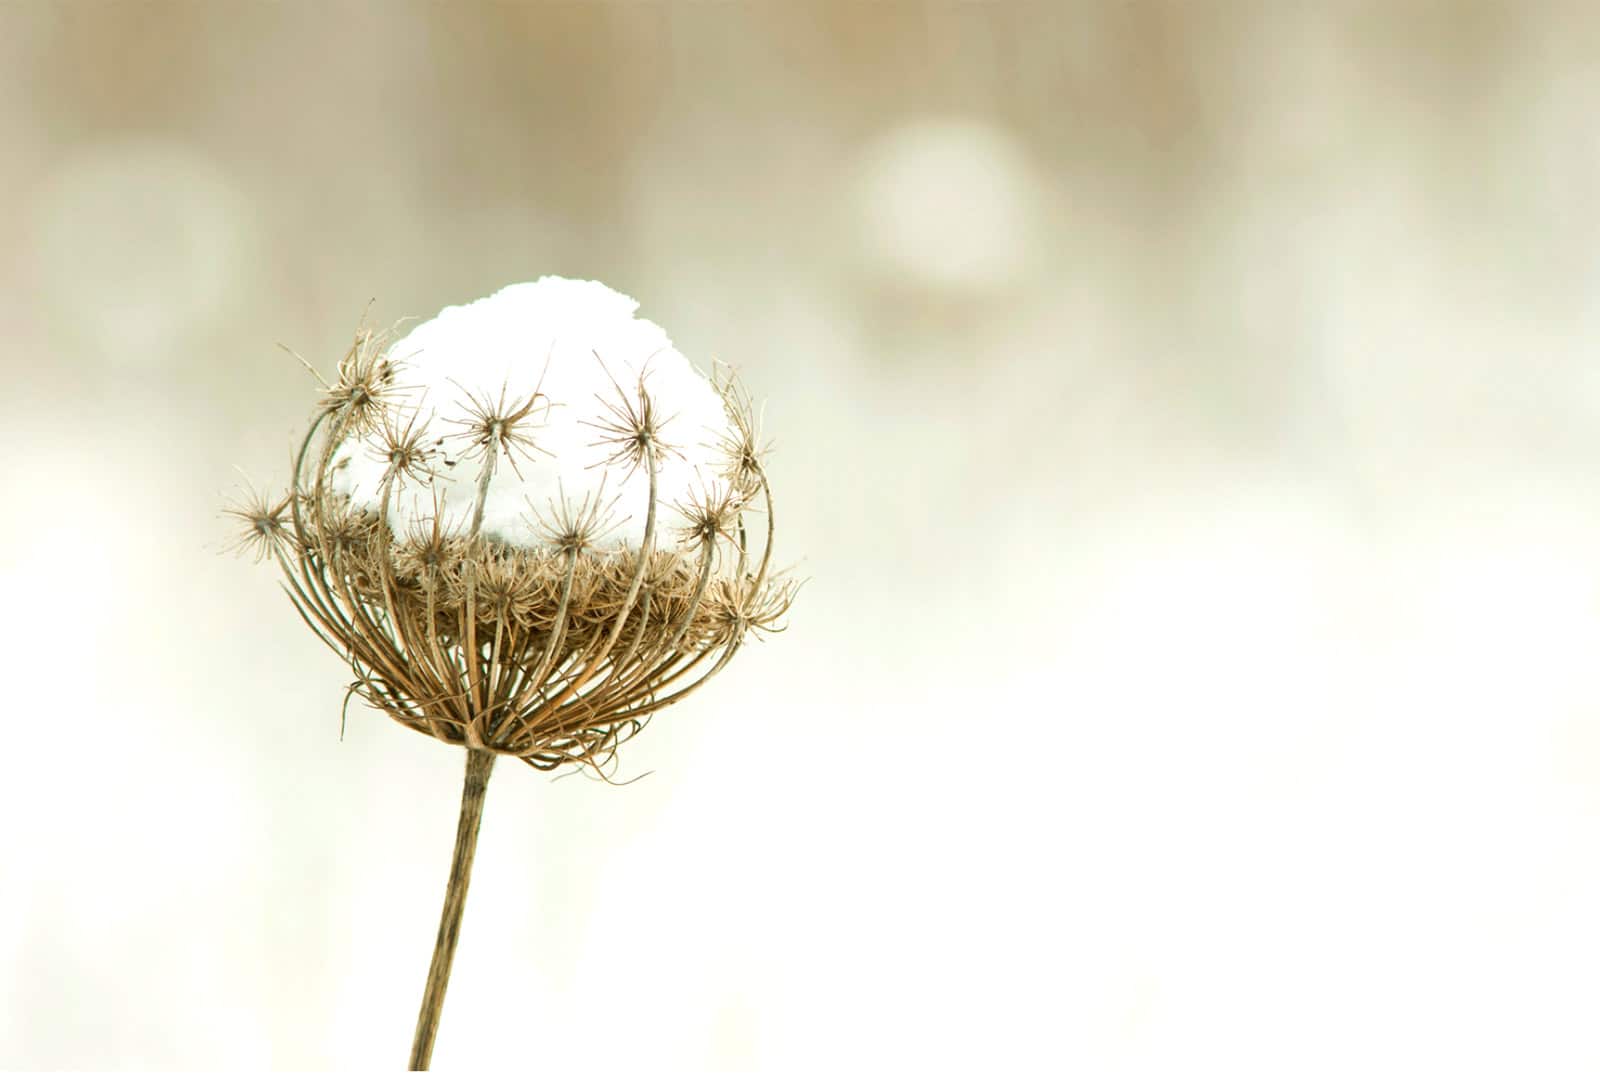 Dried flower seedhead in the snow